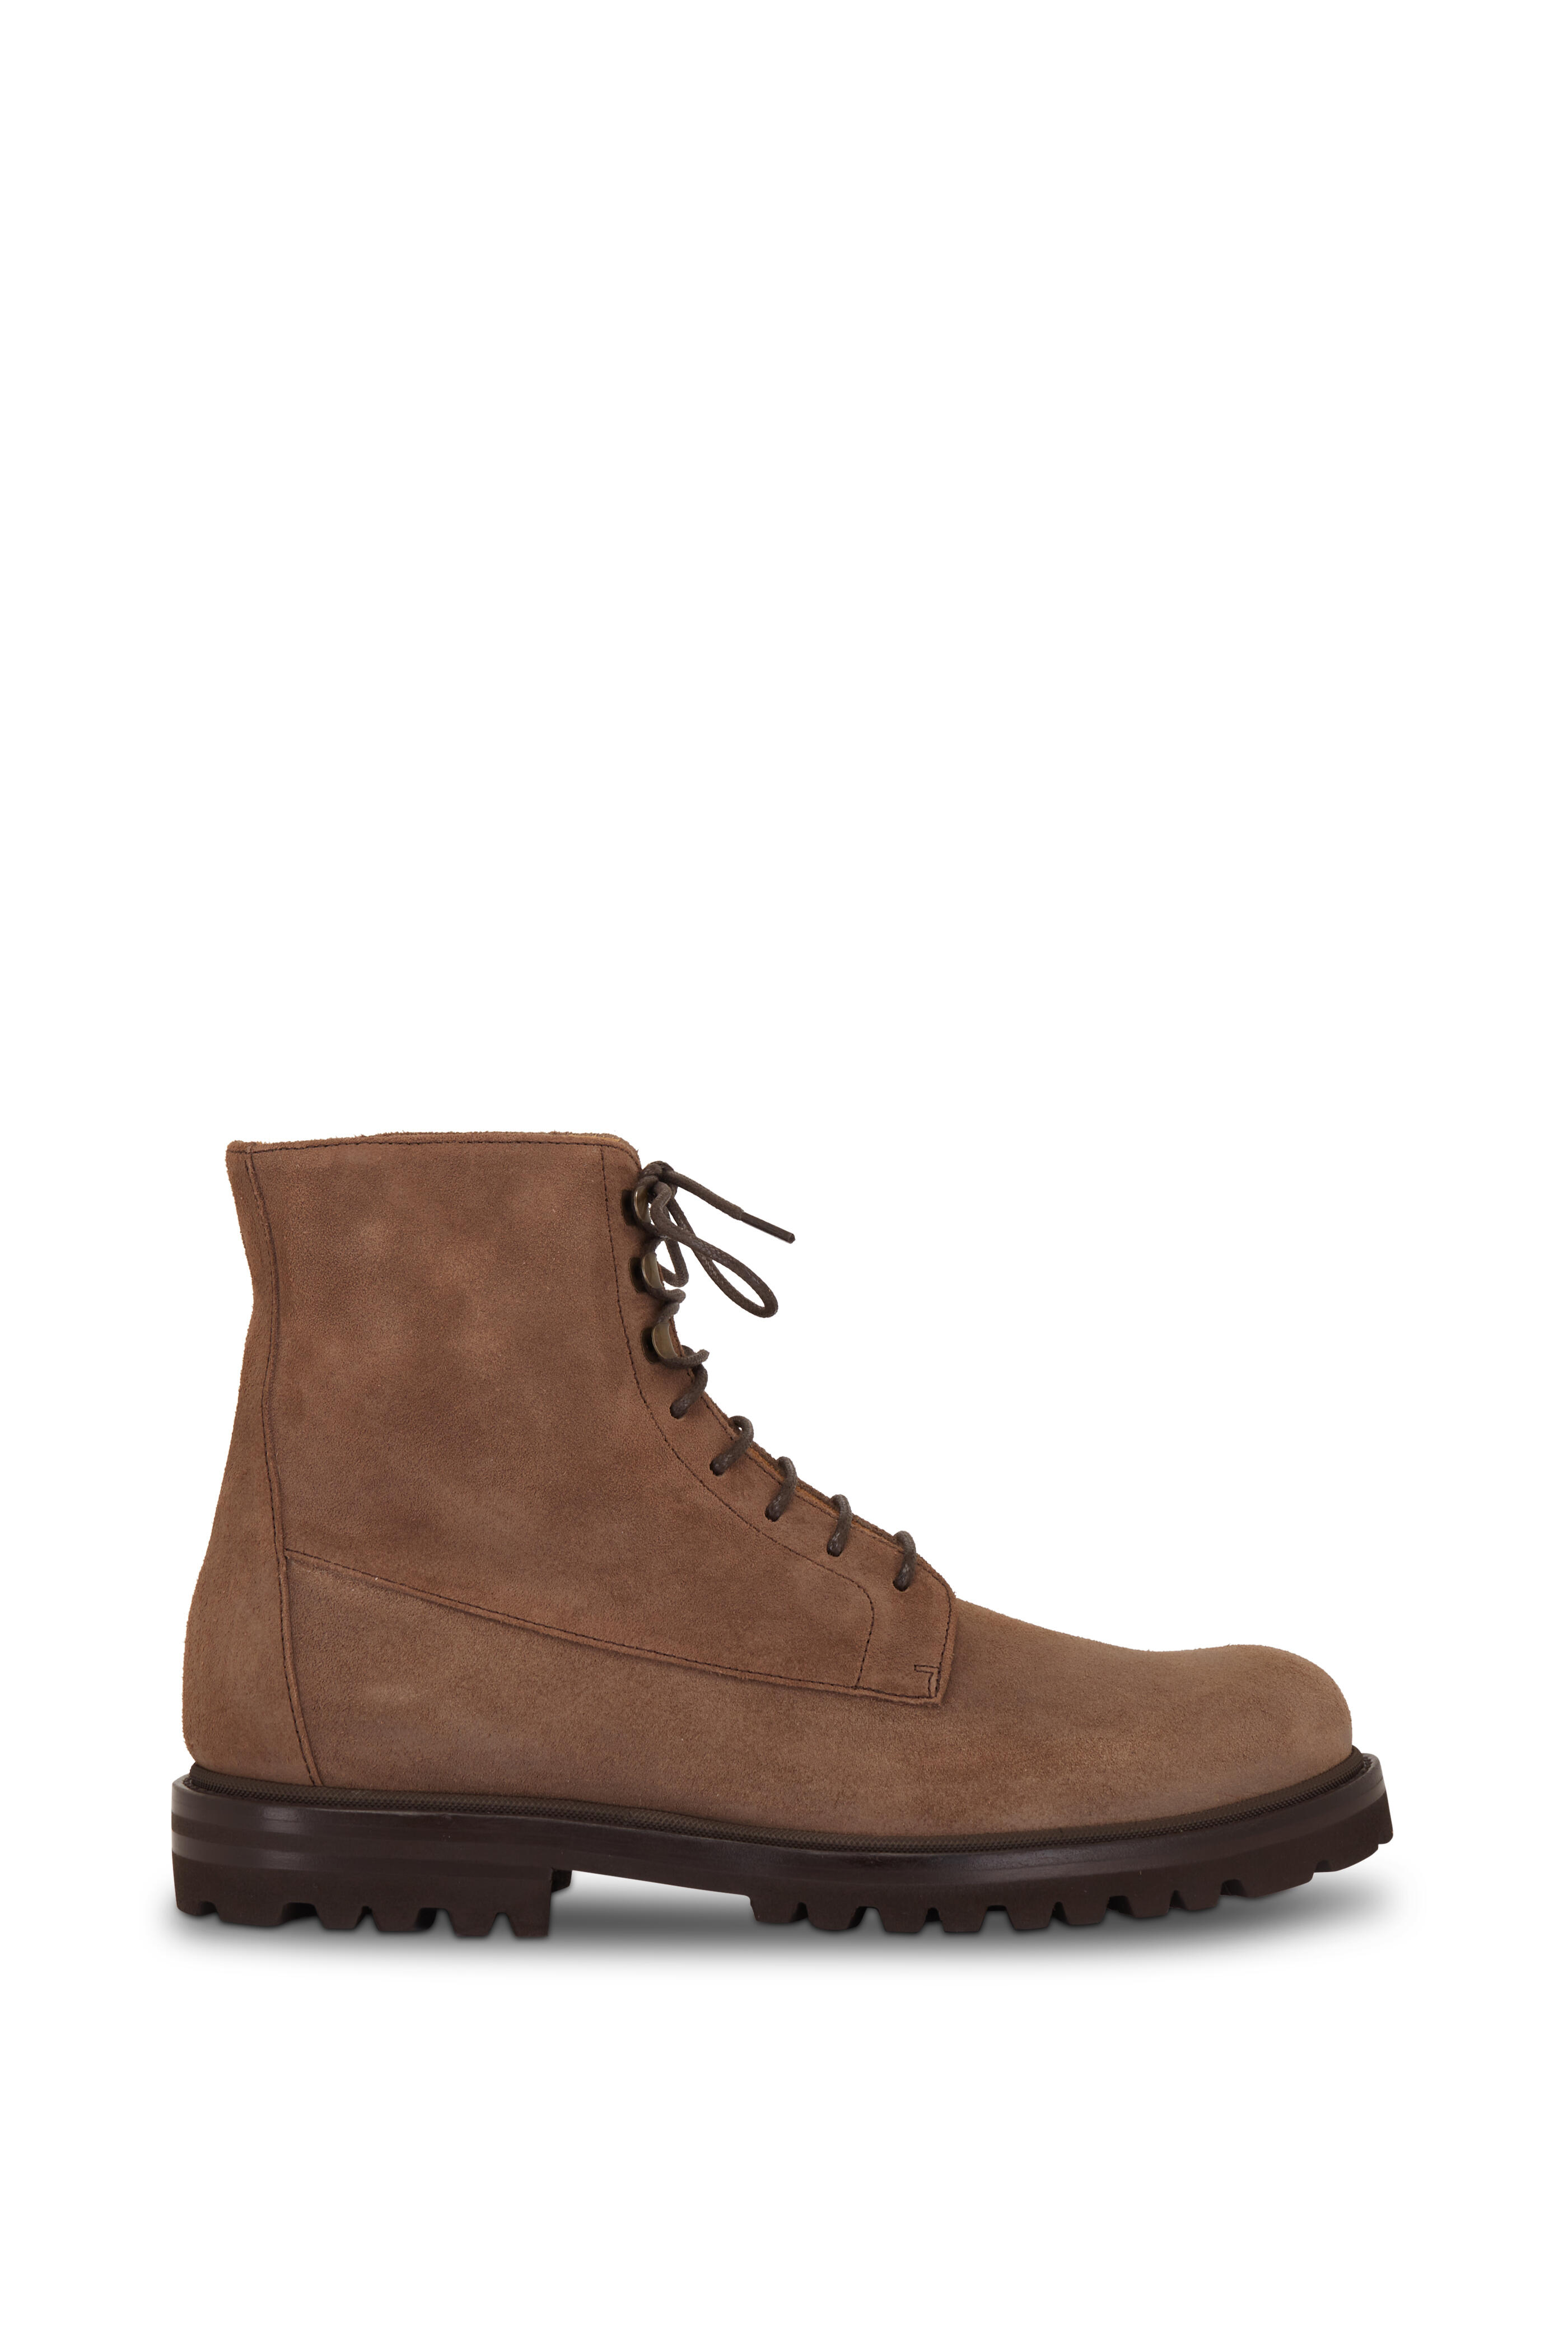 Brunello Cucinelli - Brown Suede Lace Up Boot | Mitchell Stores